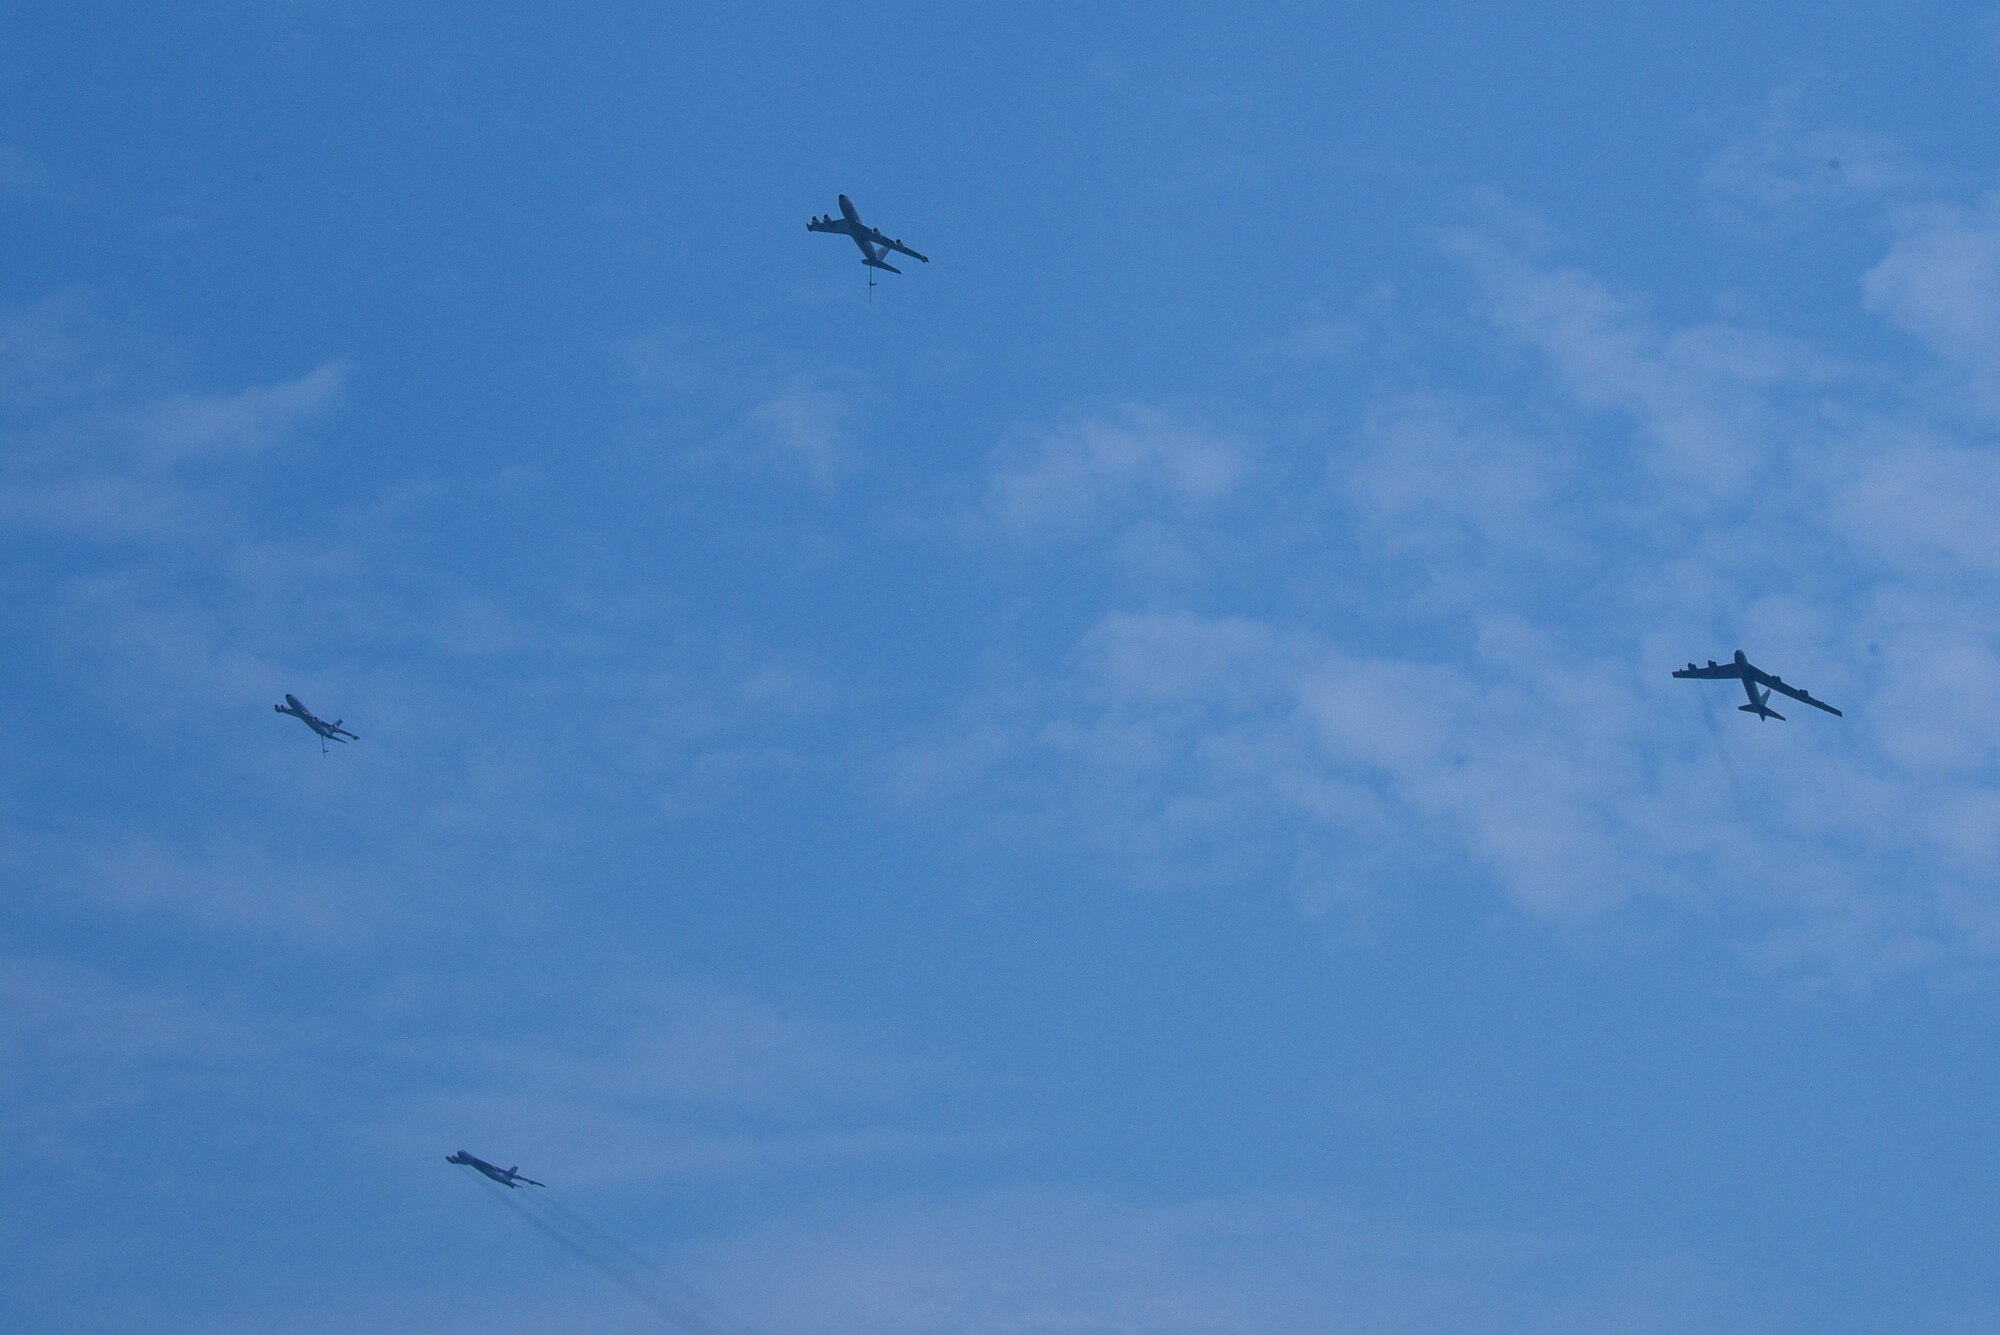 Four Aircrafts fly in the sky